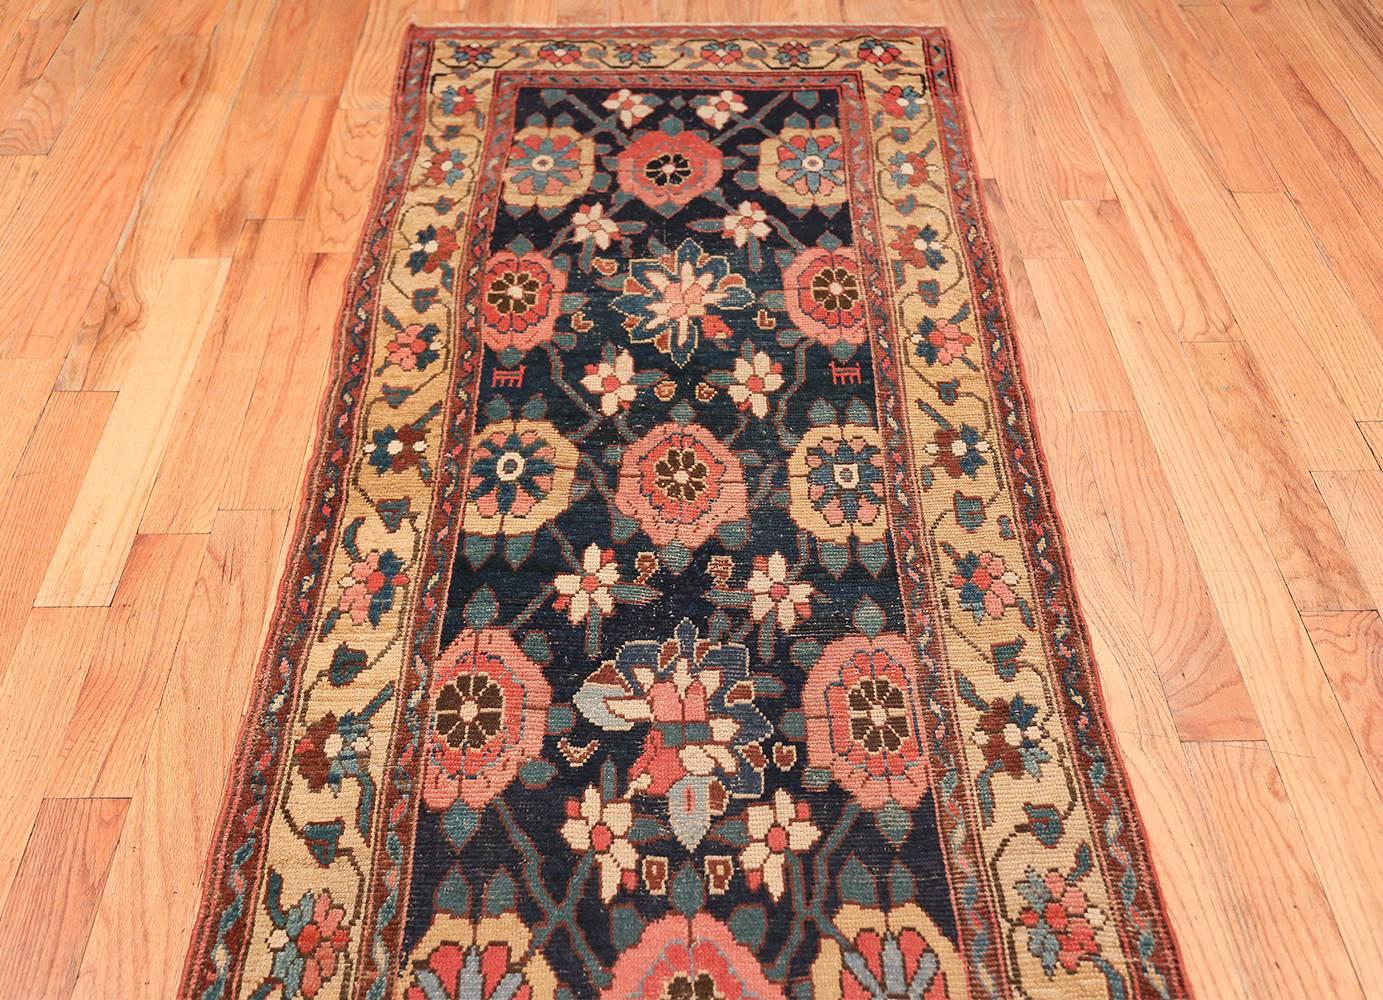 Early 19th Century Tribal Persian Northwest Runner Rug. Size: 2 ft 10 in x 19 ft 4